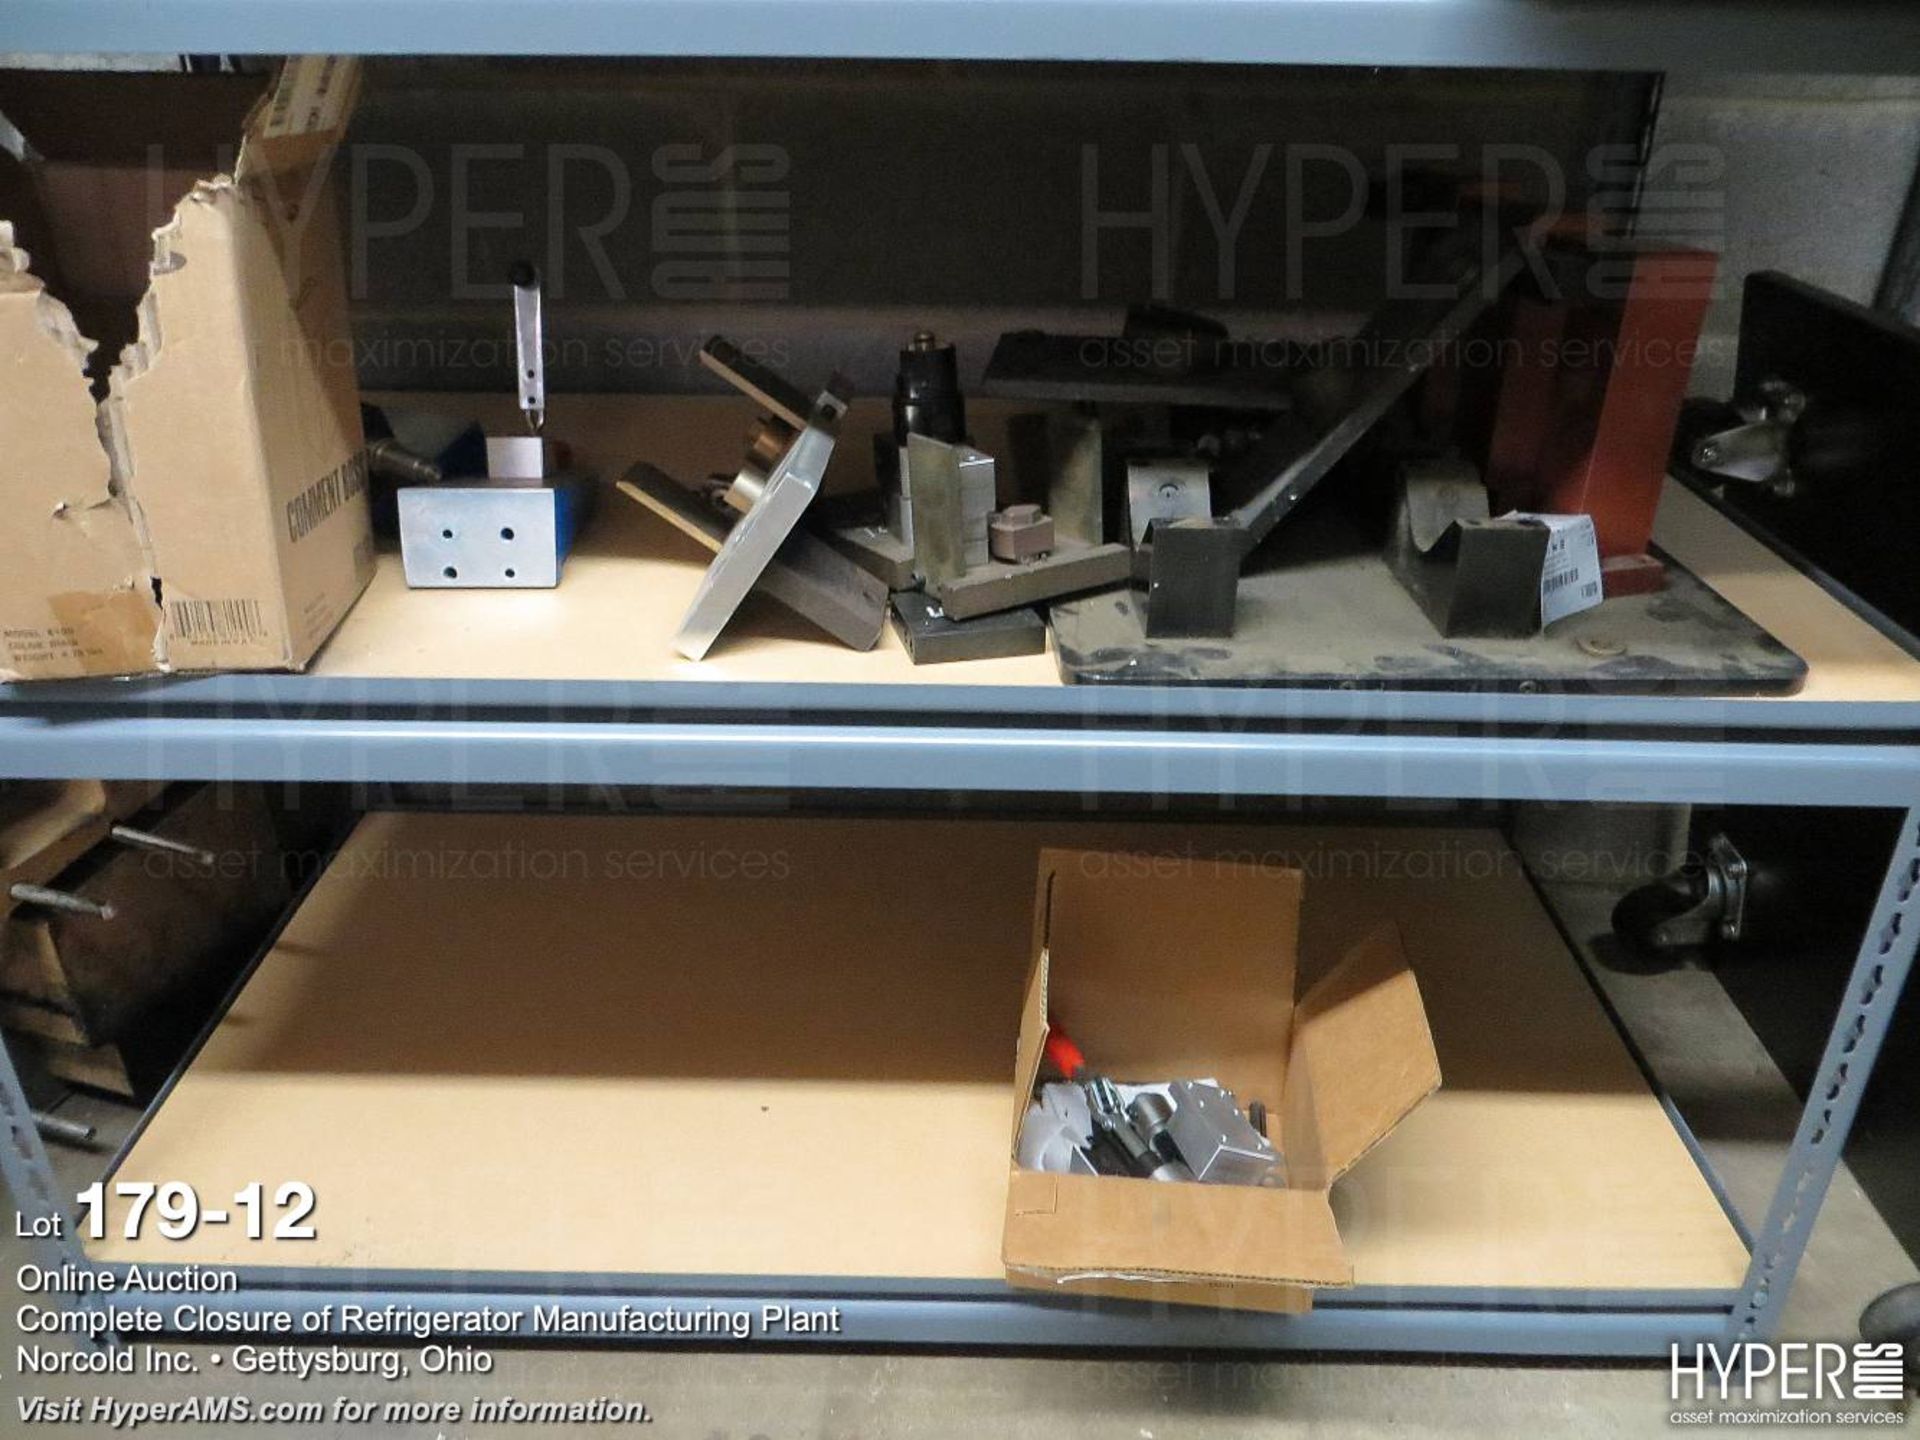 (lot) various MRO parts and supplies in room - Image 13 of 18